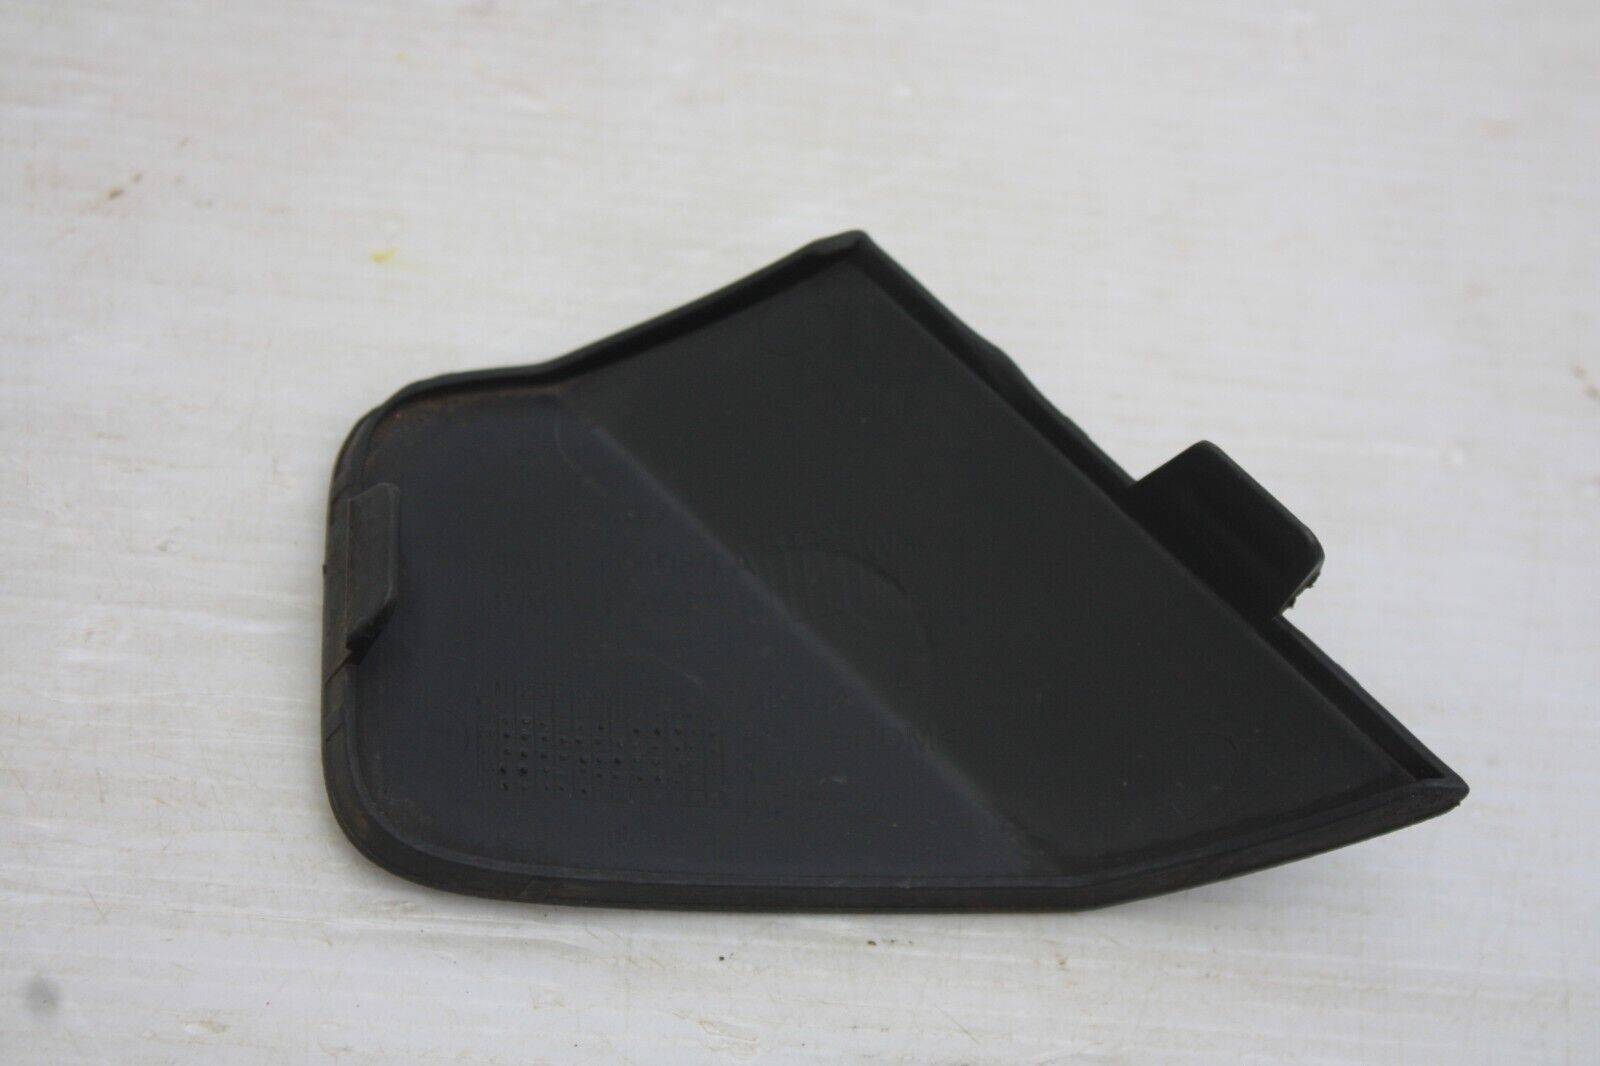 Ford-Fiesta-Front-Bumper-Tow-Cover-2008-TO-2012-8A61-17A989-A-Genuine-175685891847-8